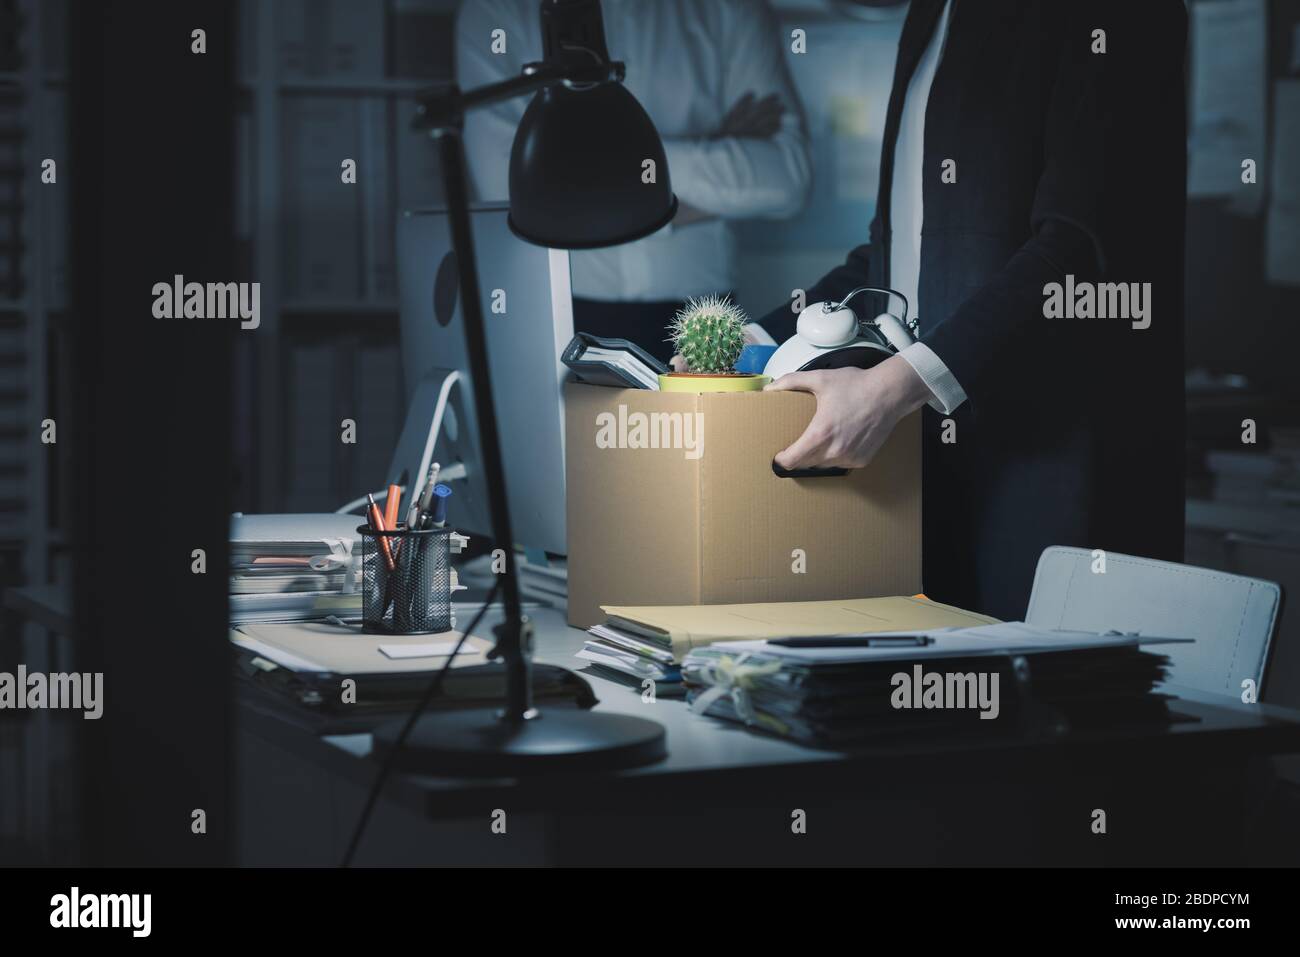 Boss firing a young employee in the office, she is packing her belongings and holding a cardboard box Stock Photo